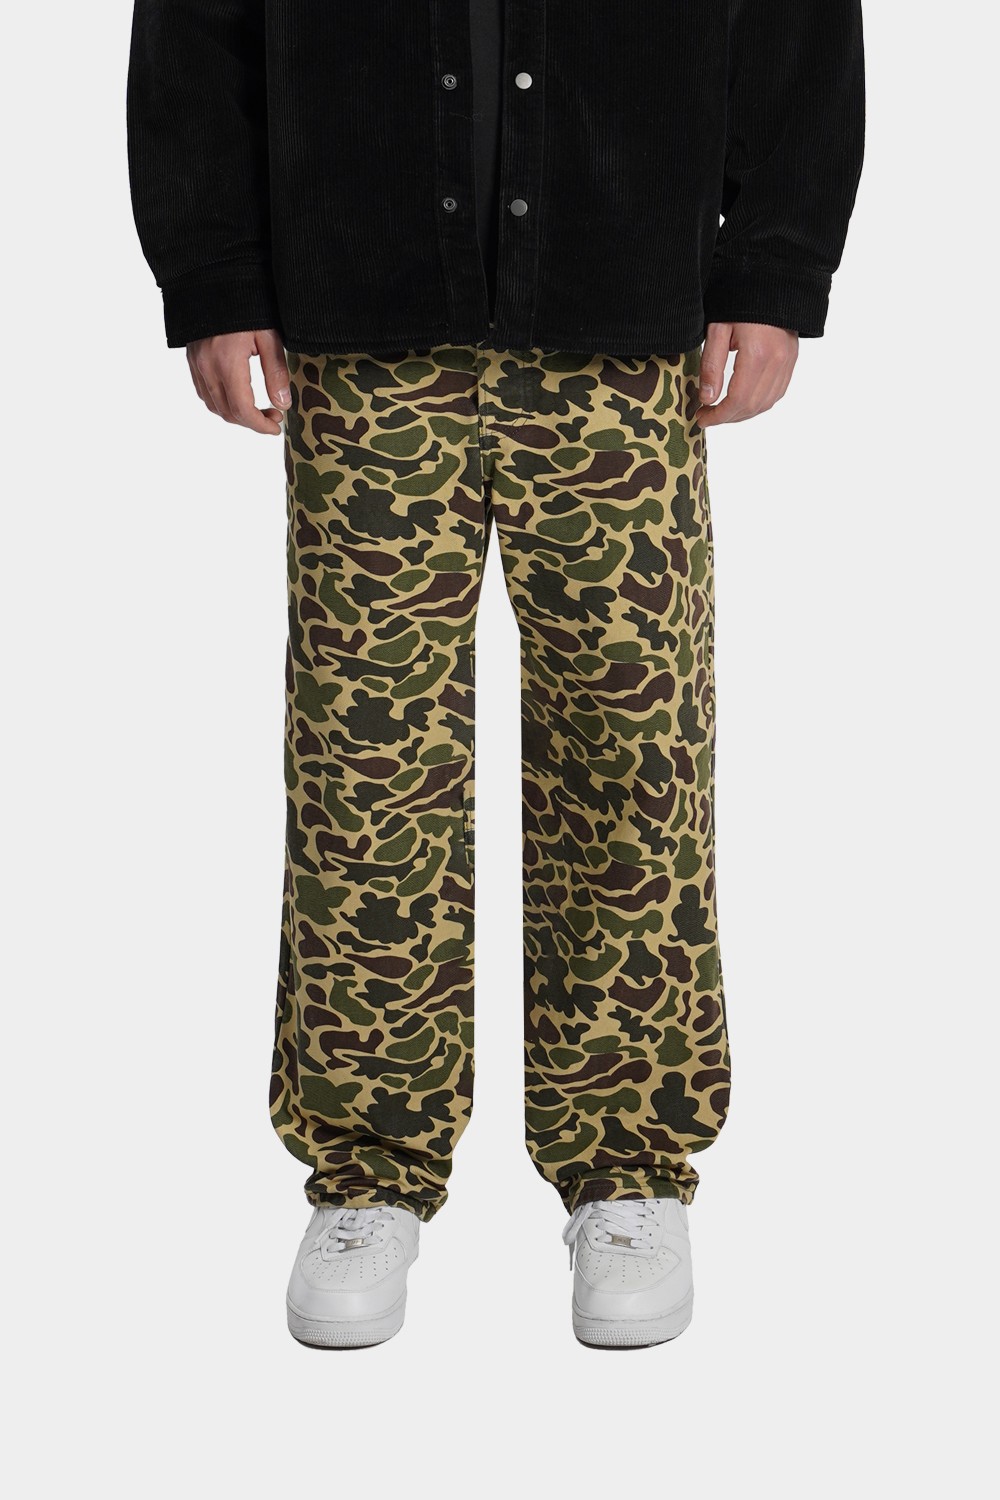 Baggy Camouflage Pants (SPRM3)